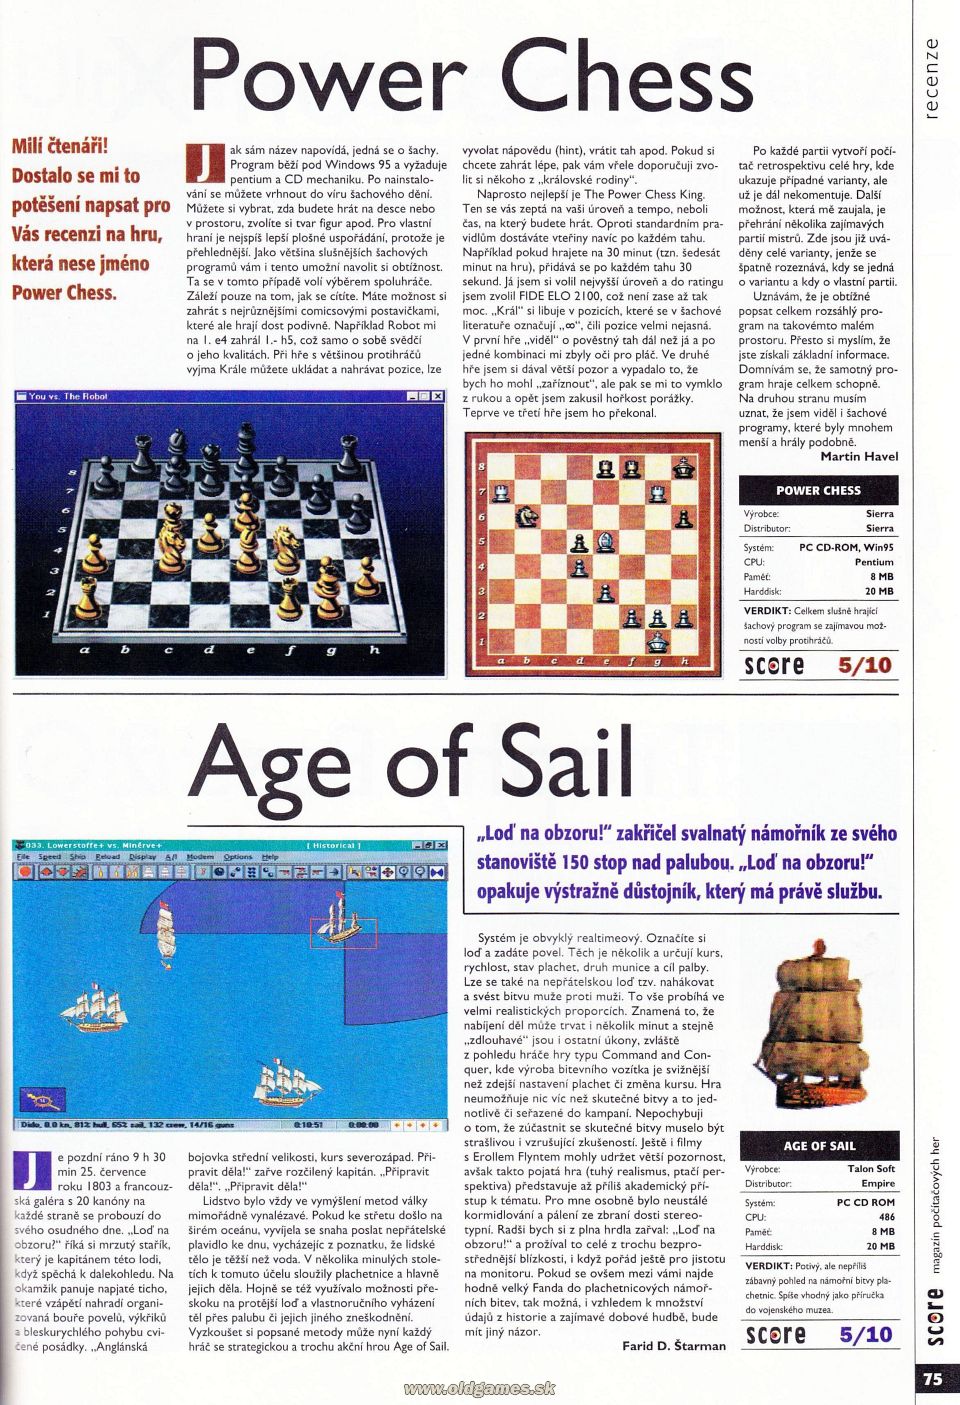 Power Chess, Age of Sail